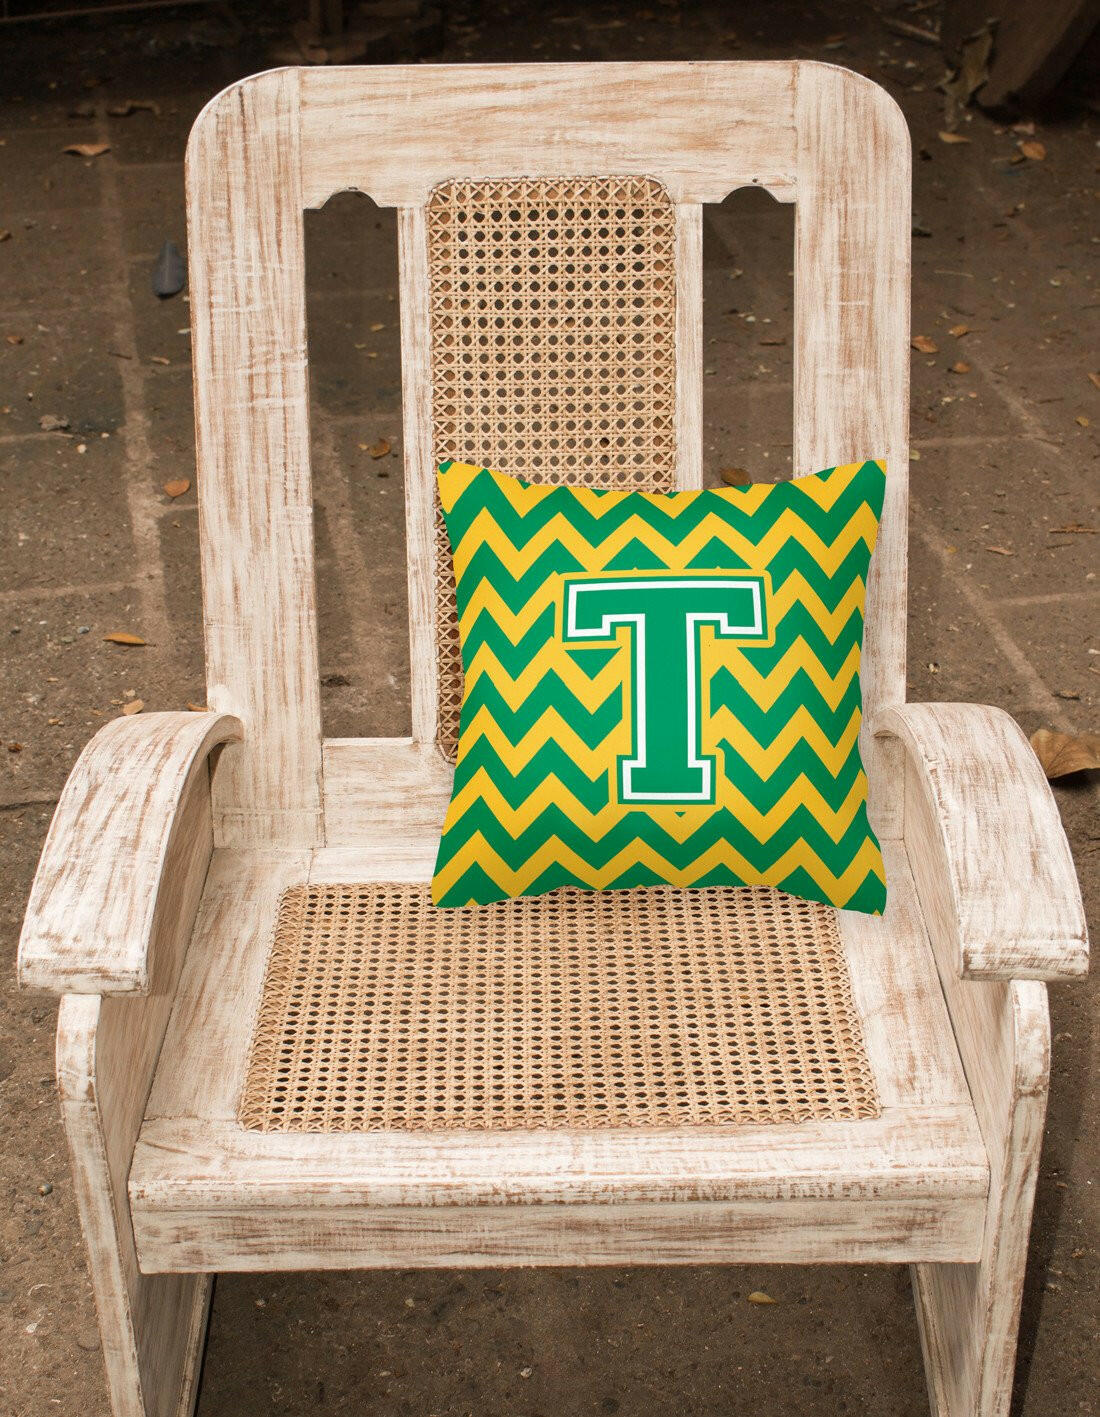 Letter T Chevron Green and Gold Fabric Decorative Pillow CJ1059-TPW1414 by Caroline's Treasures